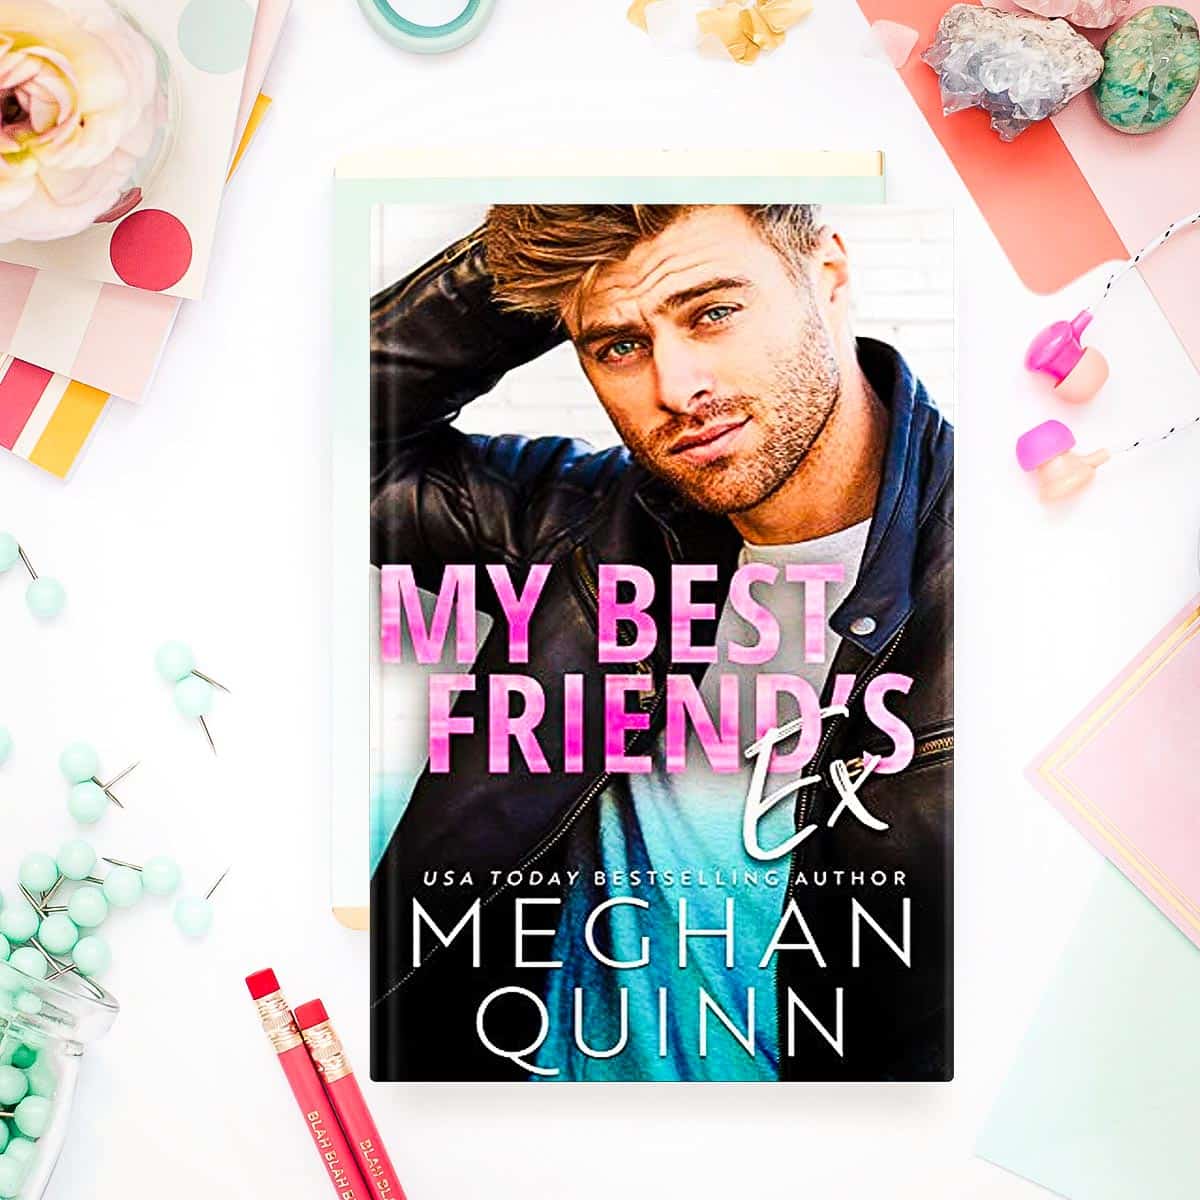 MY BEST FRIEND'S EX by Meghan Quinn is a contemporary romantic comedy and the second book in the Binghamton series. Enjoy this excerpt and be sure to grab a copy!